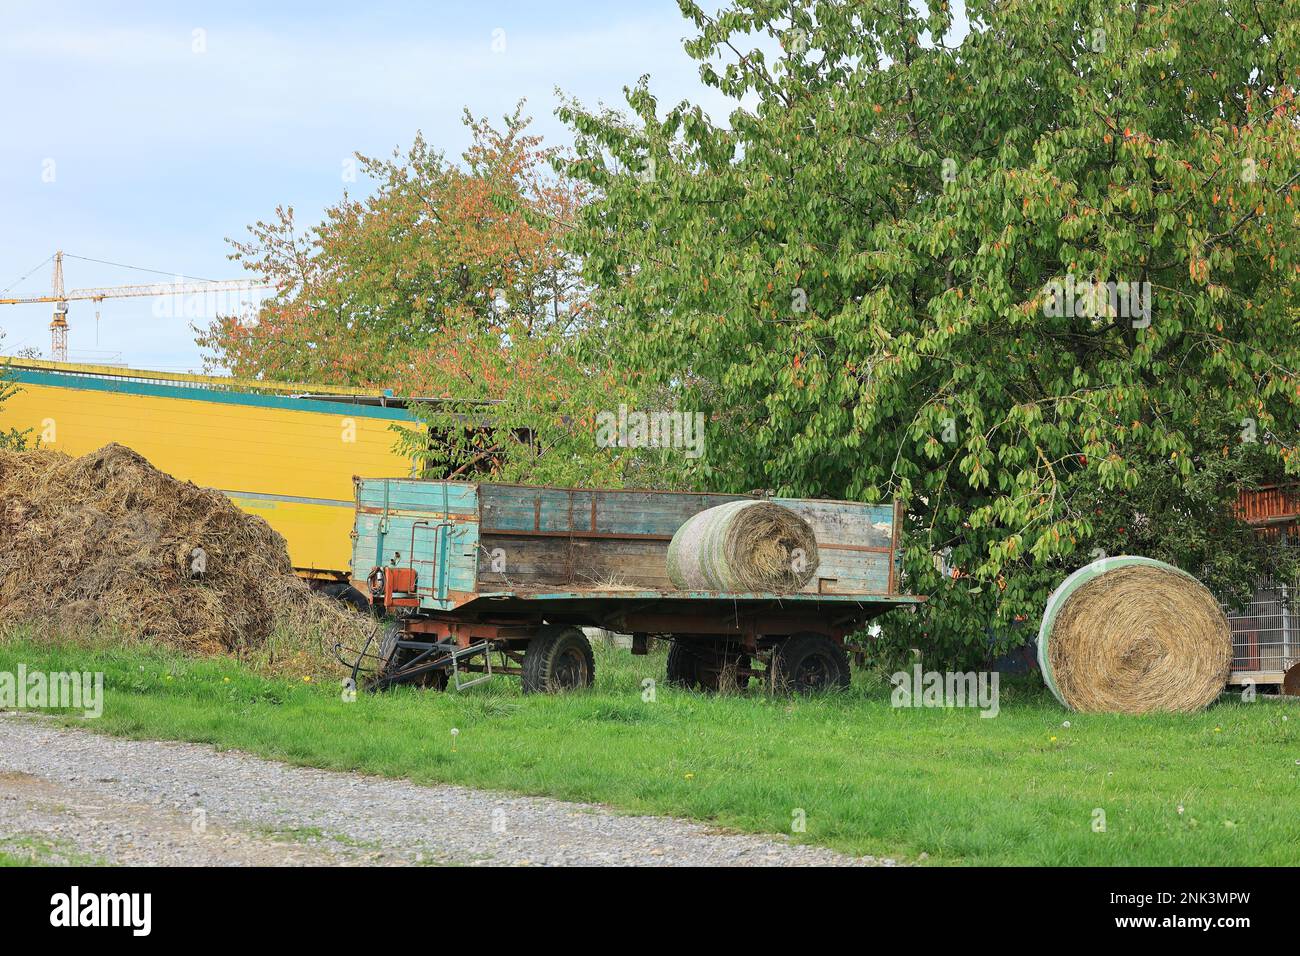 Trailer for transporting hay bales in a meadow Stock Photo